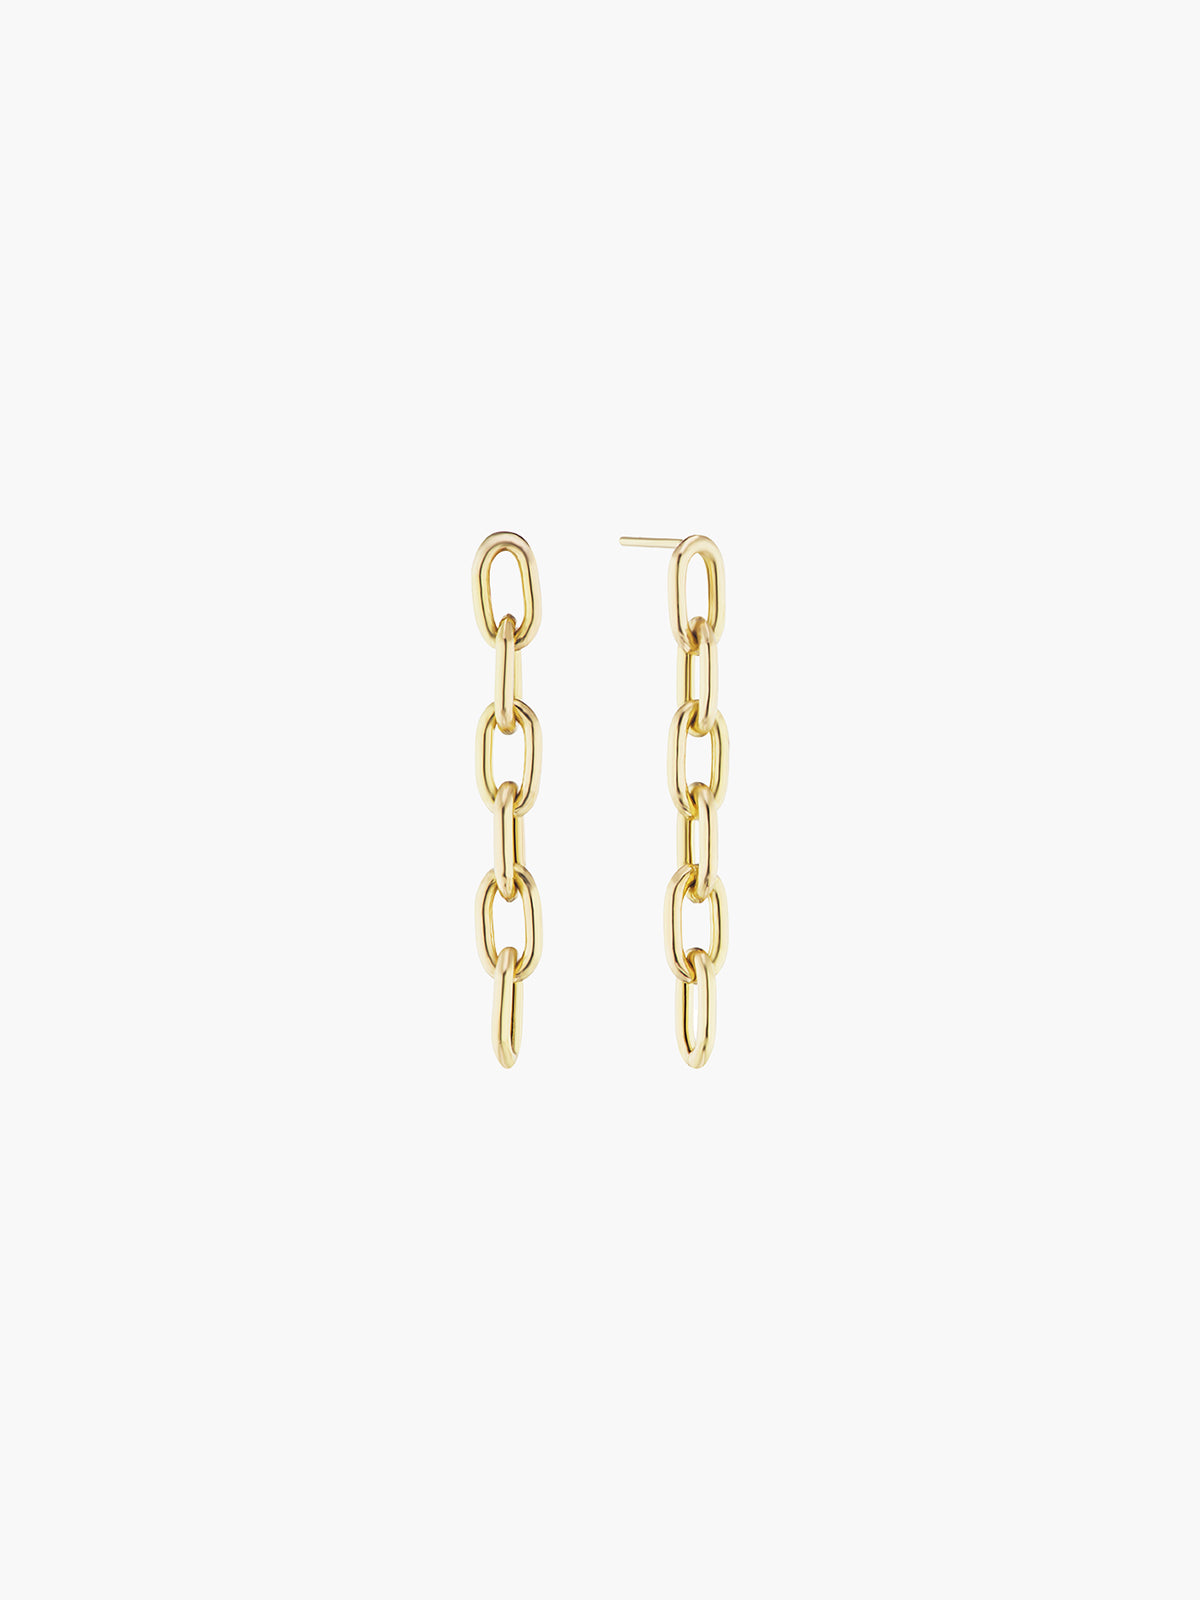 Elongated Thick Chain Link Earrings Short Elongated Thick Chain Link Earrings Short